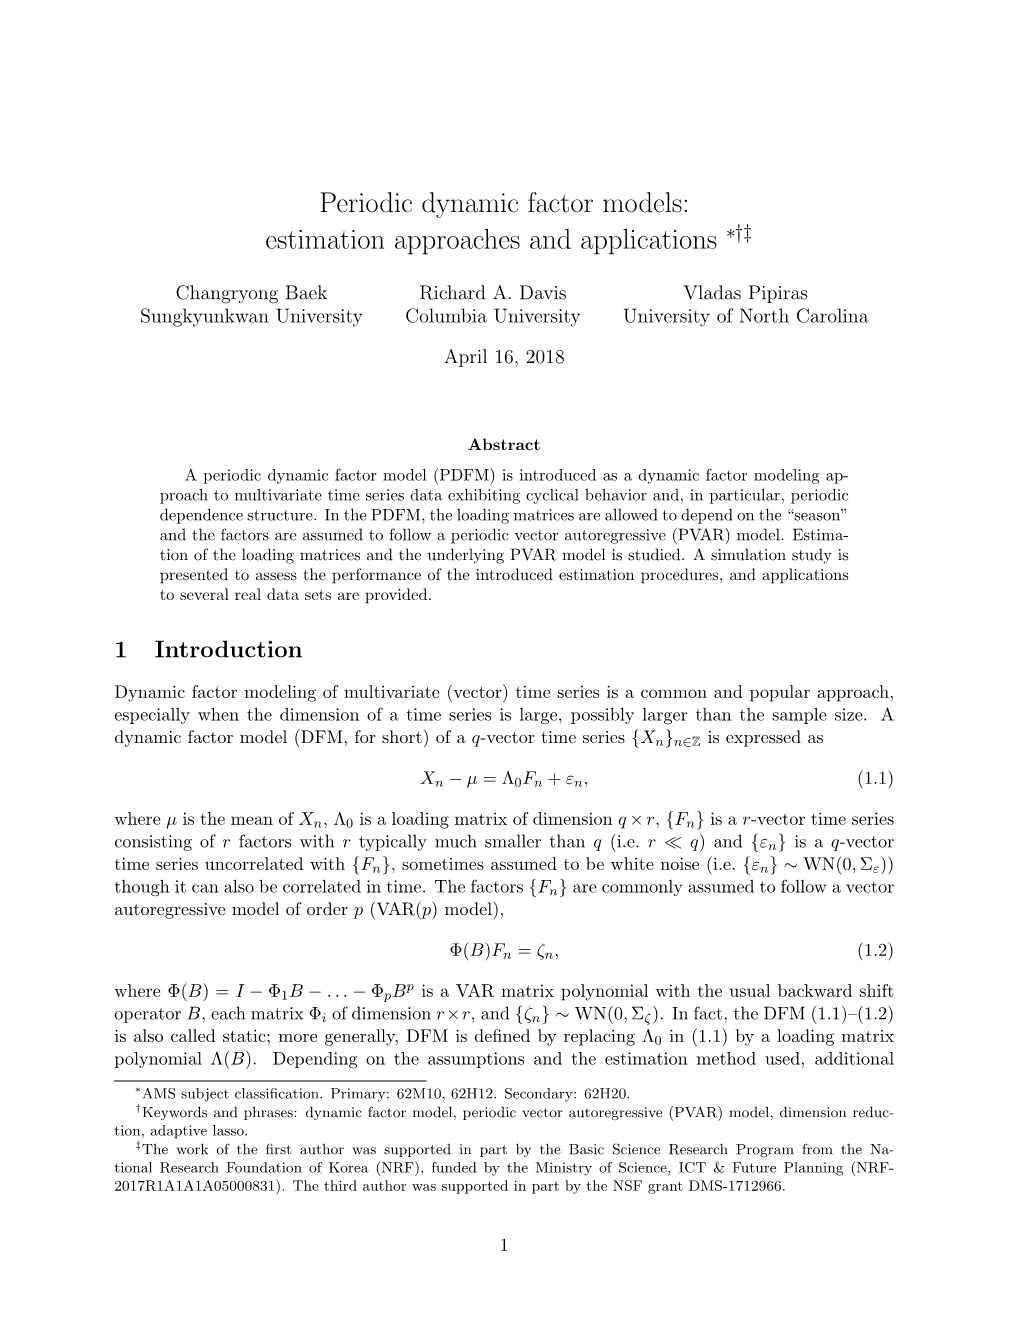 Periodic Dynamic Factor Models: Estimation Approaches and Applications ∗†‡